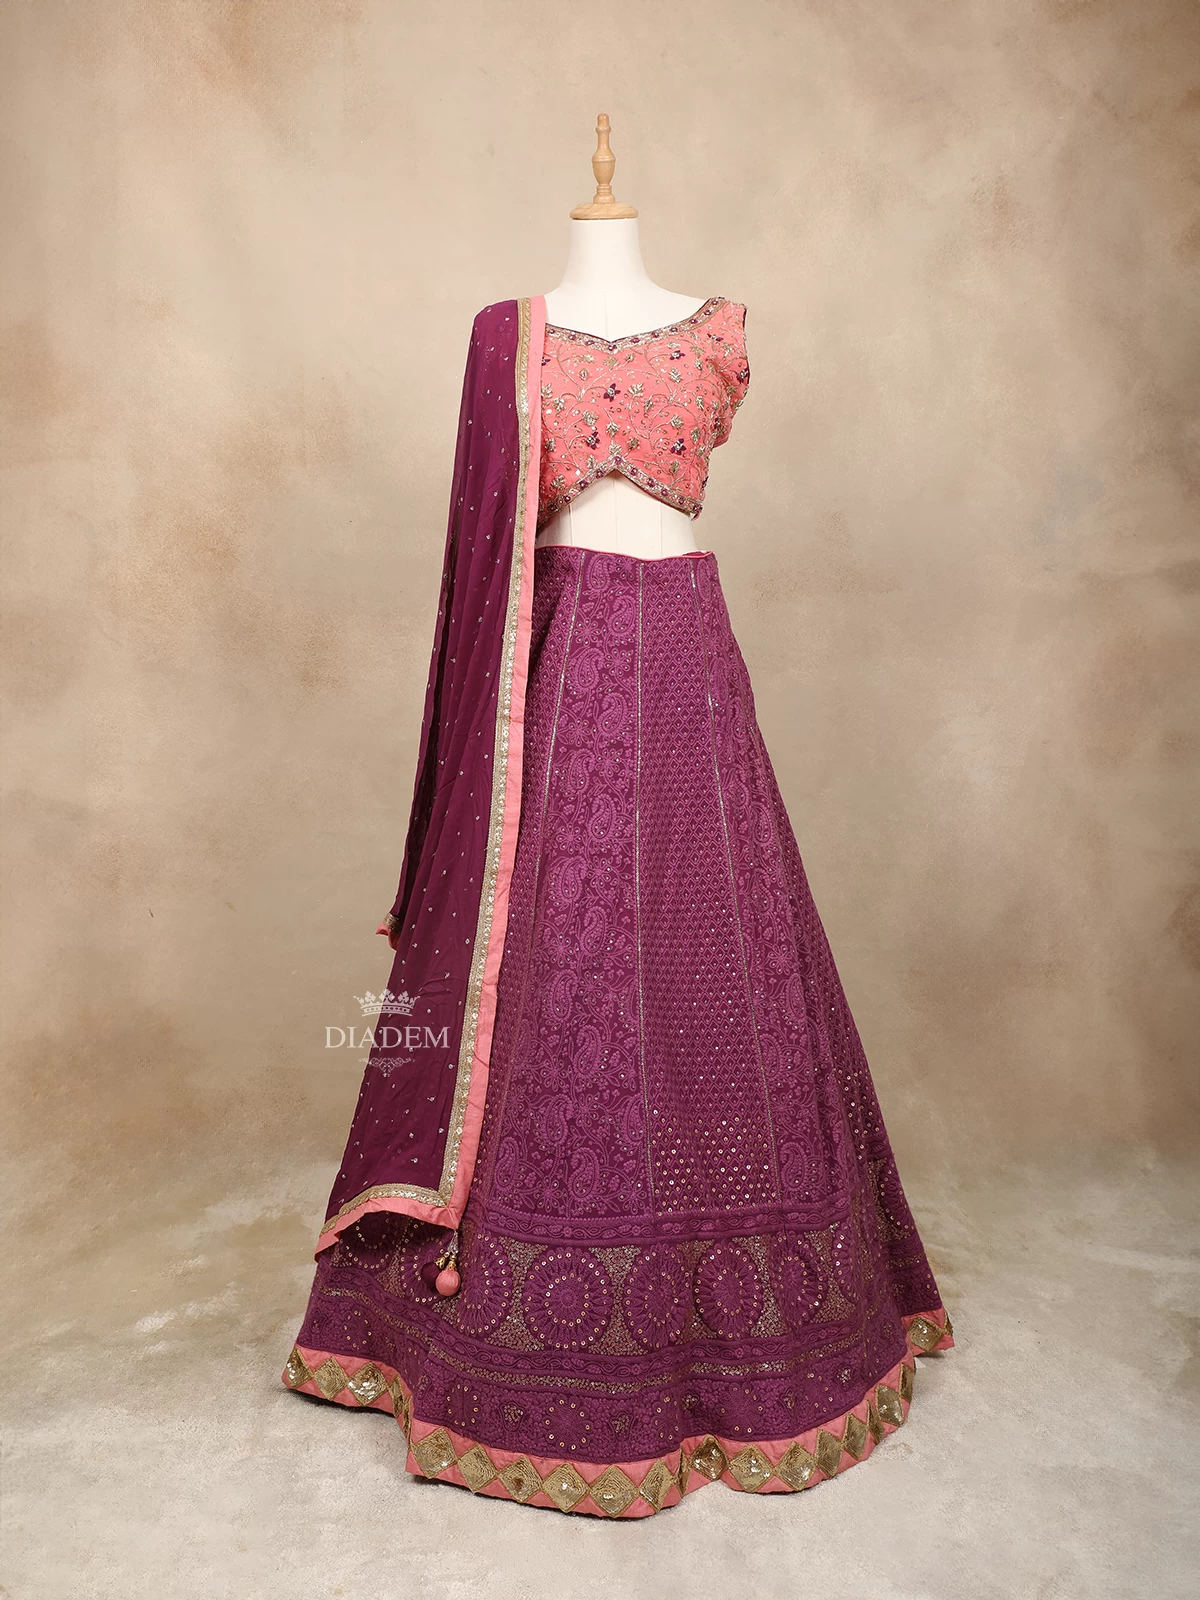 Purple Silk Bridal Lehenga Adorned with Floral Threadwork Embroidery and Beads, Paired with Dupatta